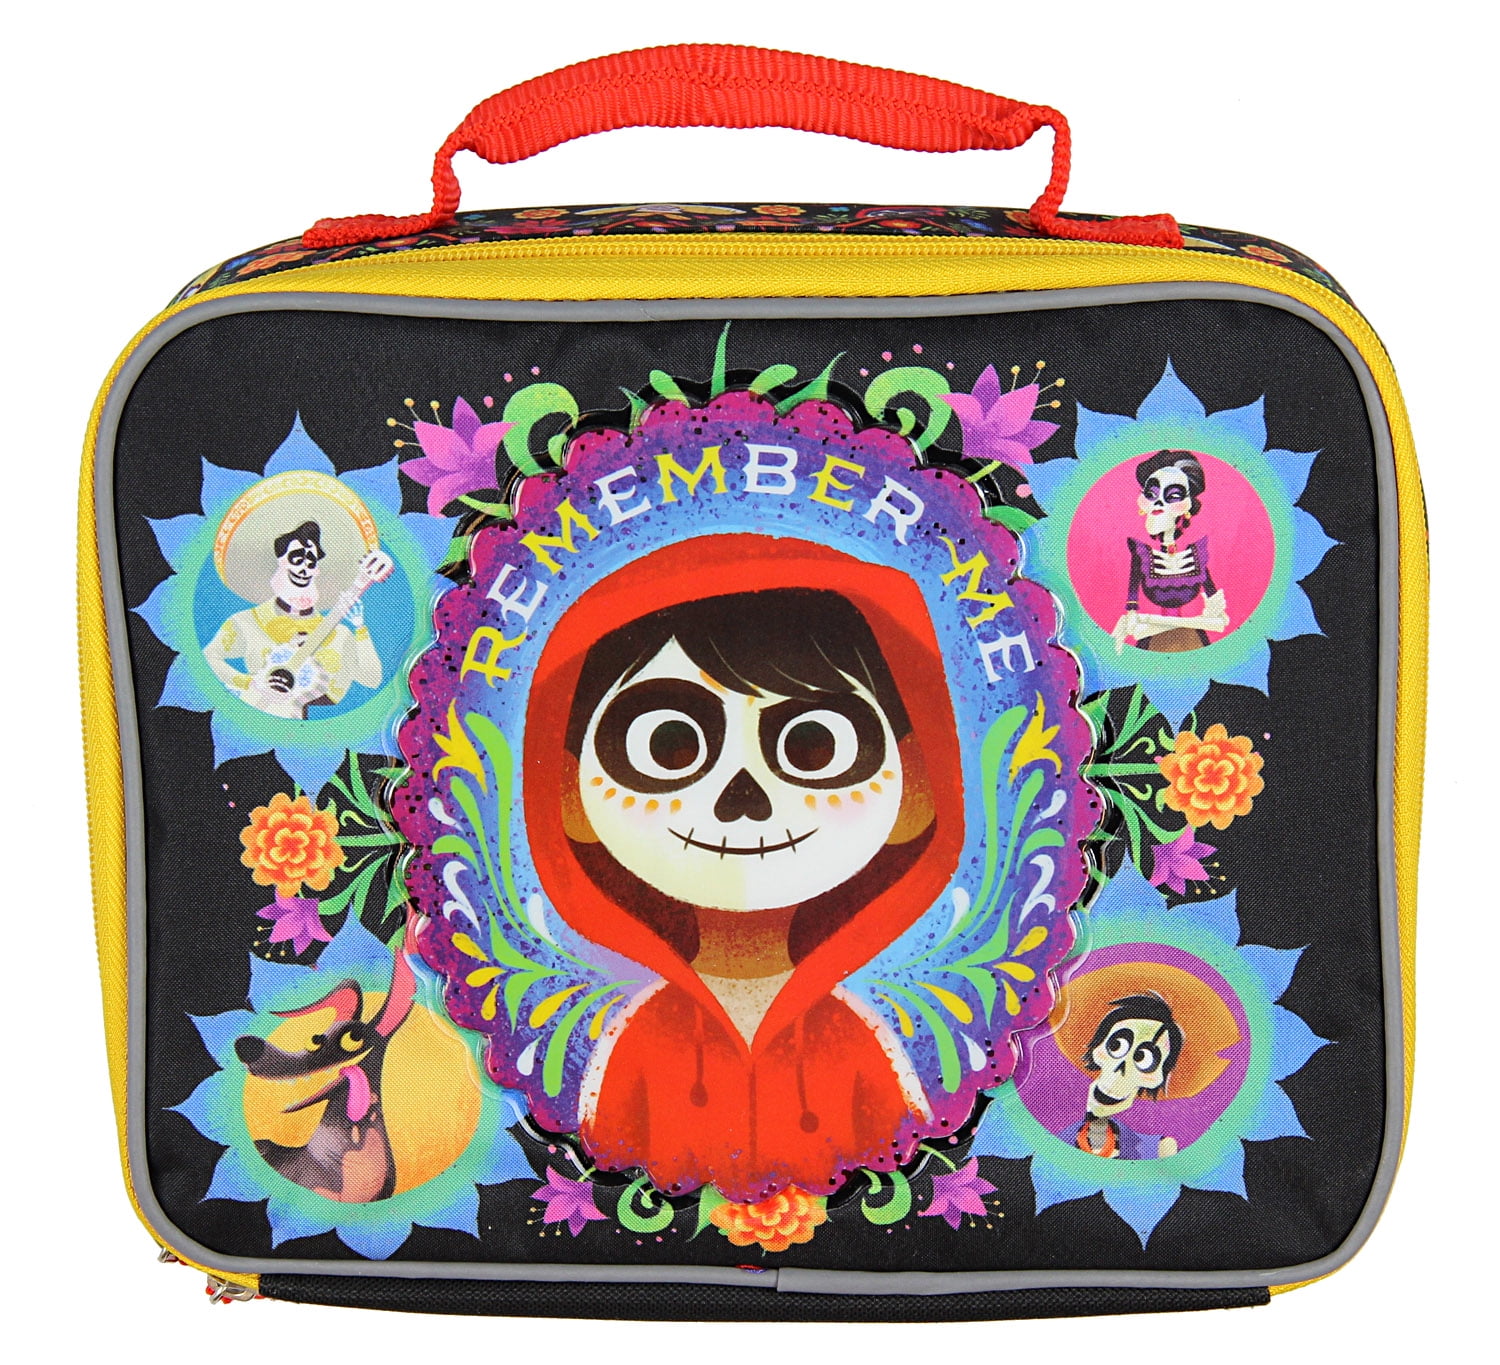 Enchantimals Dolls Insulated Cooler Bag "Friends For Life" Lunch Box Bag Tote 